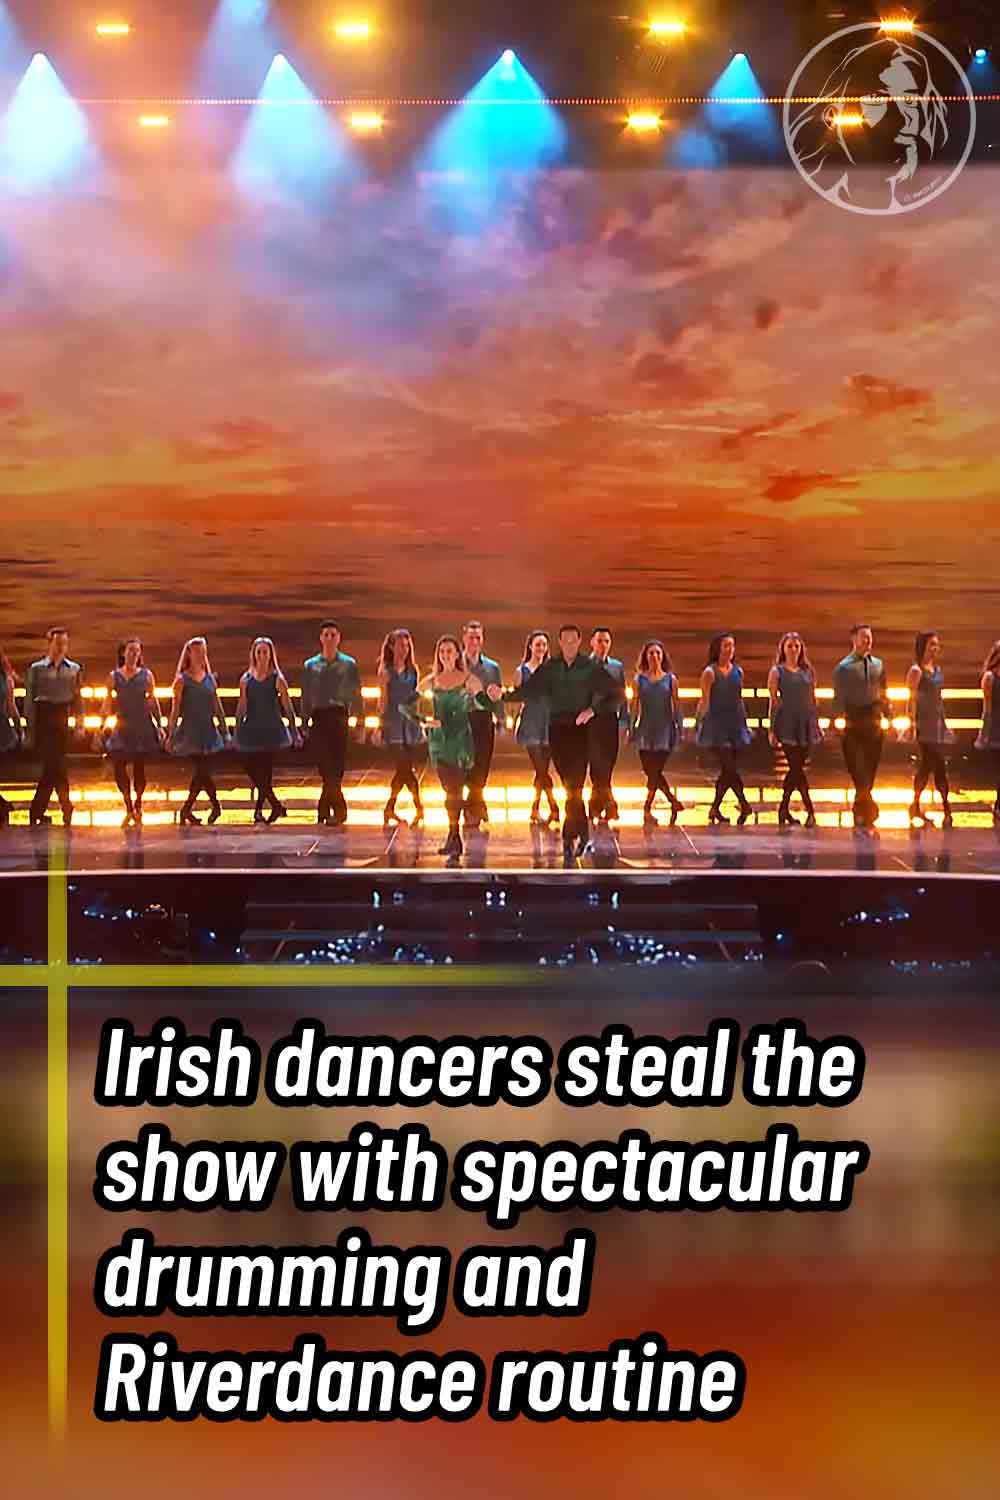 Irish dancers steal the show with spectacular drumming and Riverdance routine